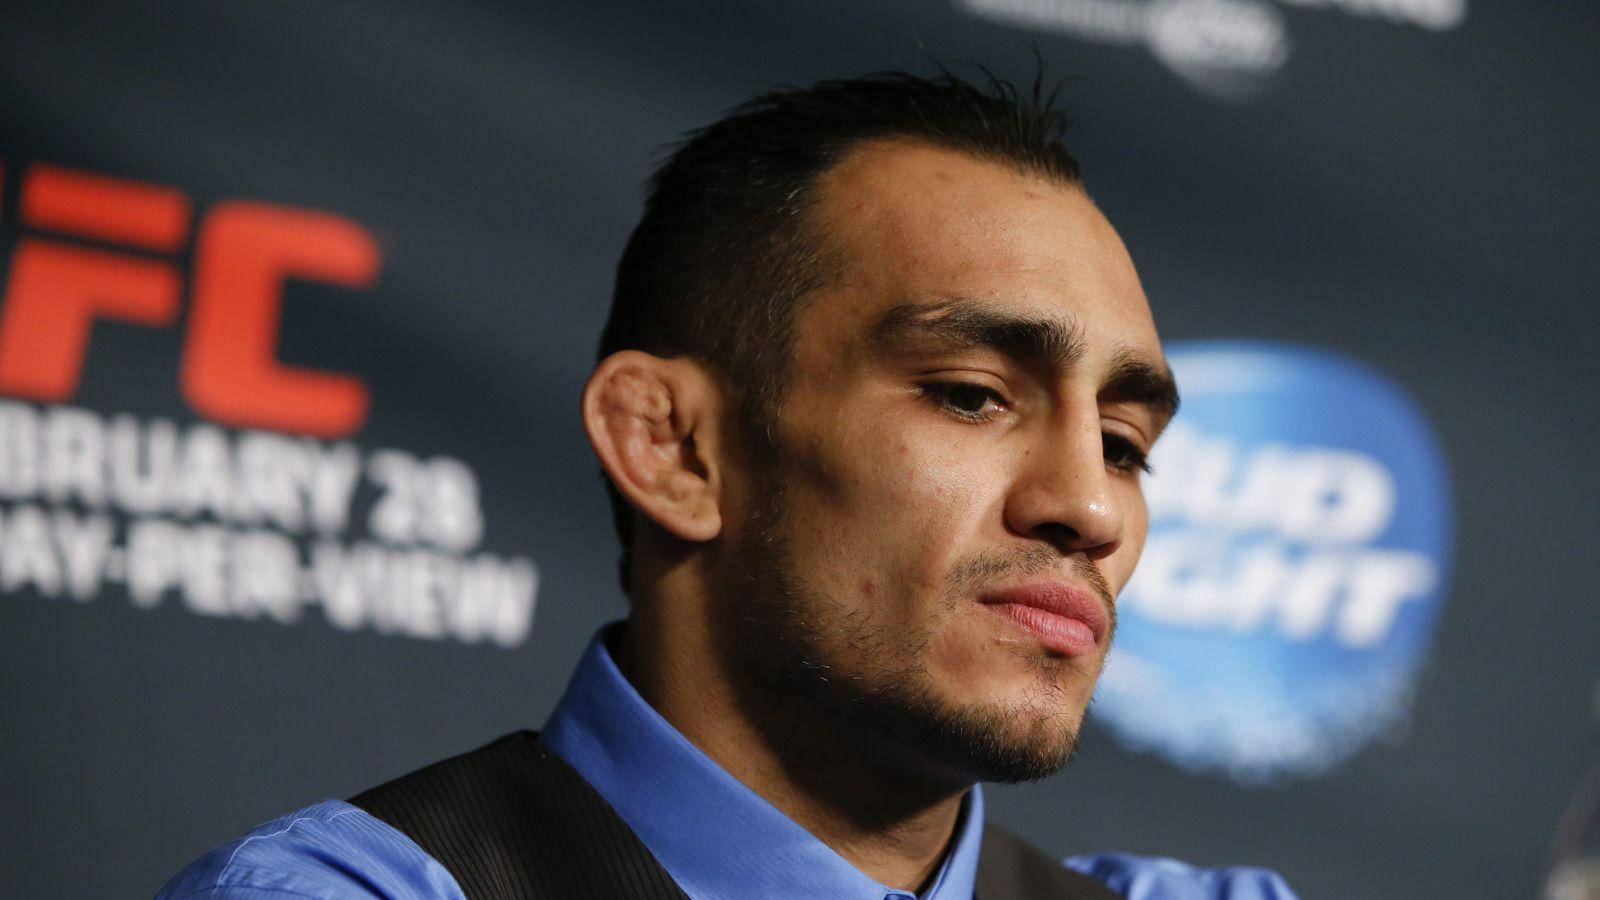 Download Tony Ferguson confidently speaking at a press conference Wallpaper  | Wallpapers.com